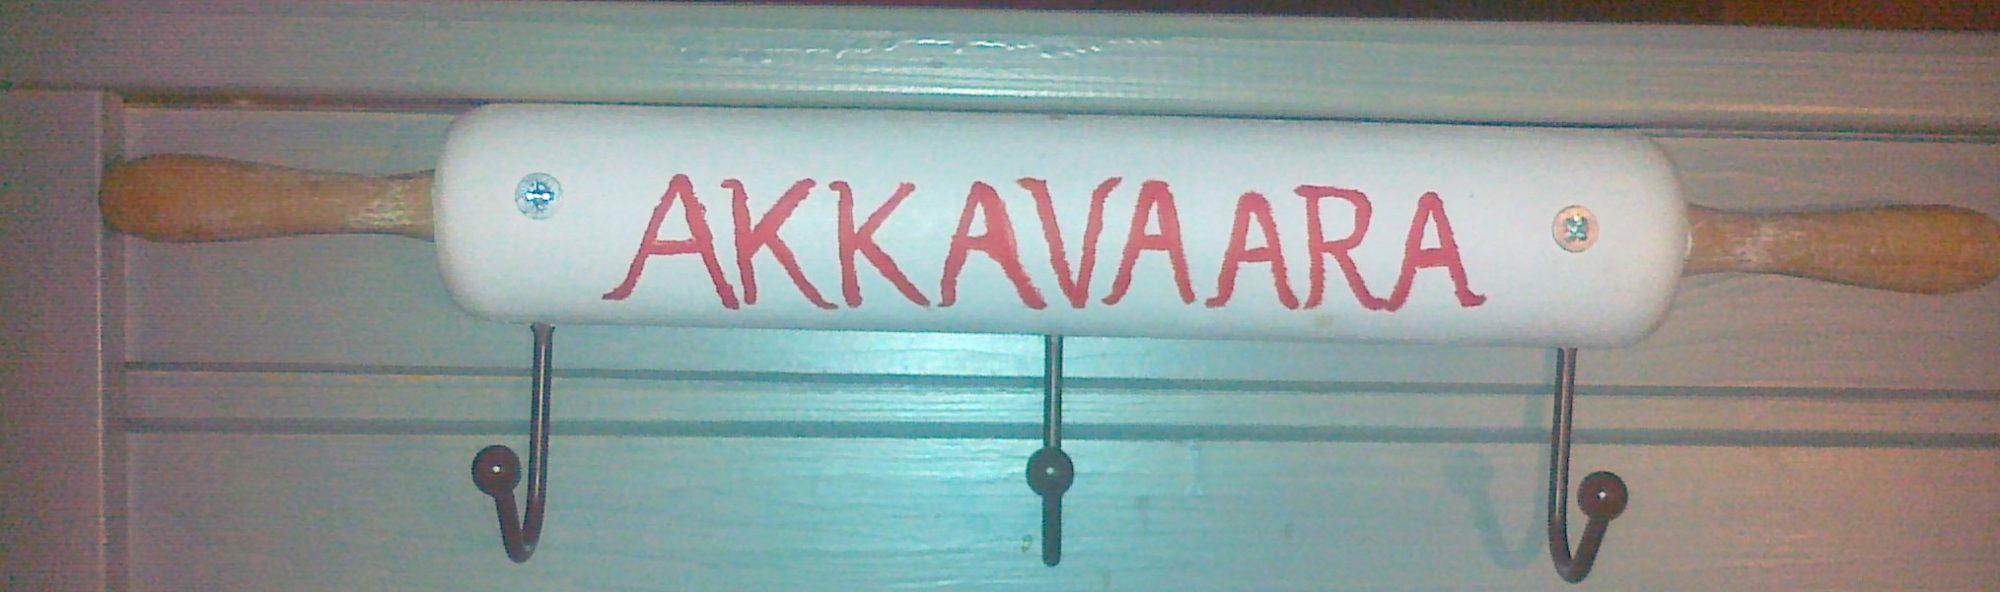 Cover image of this place Akkavaara's Pizzeria